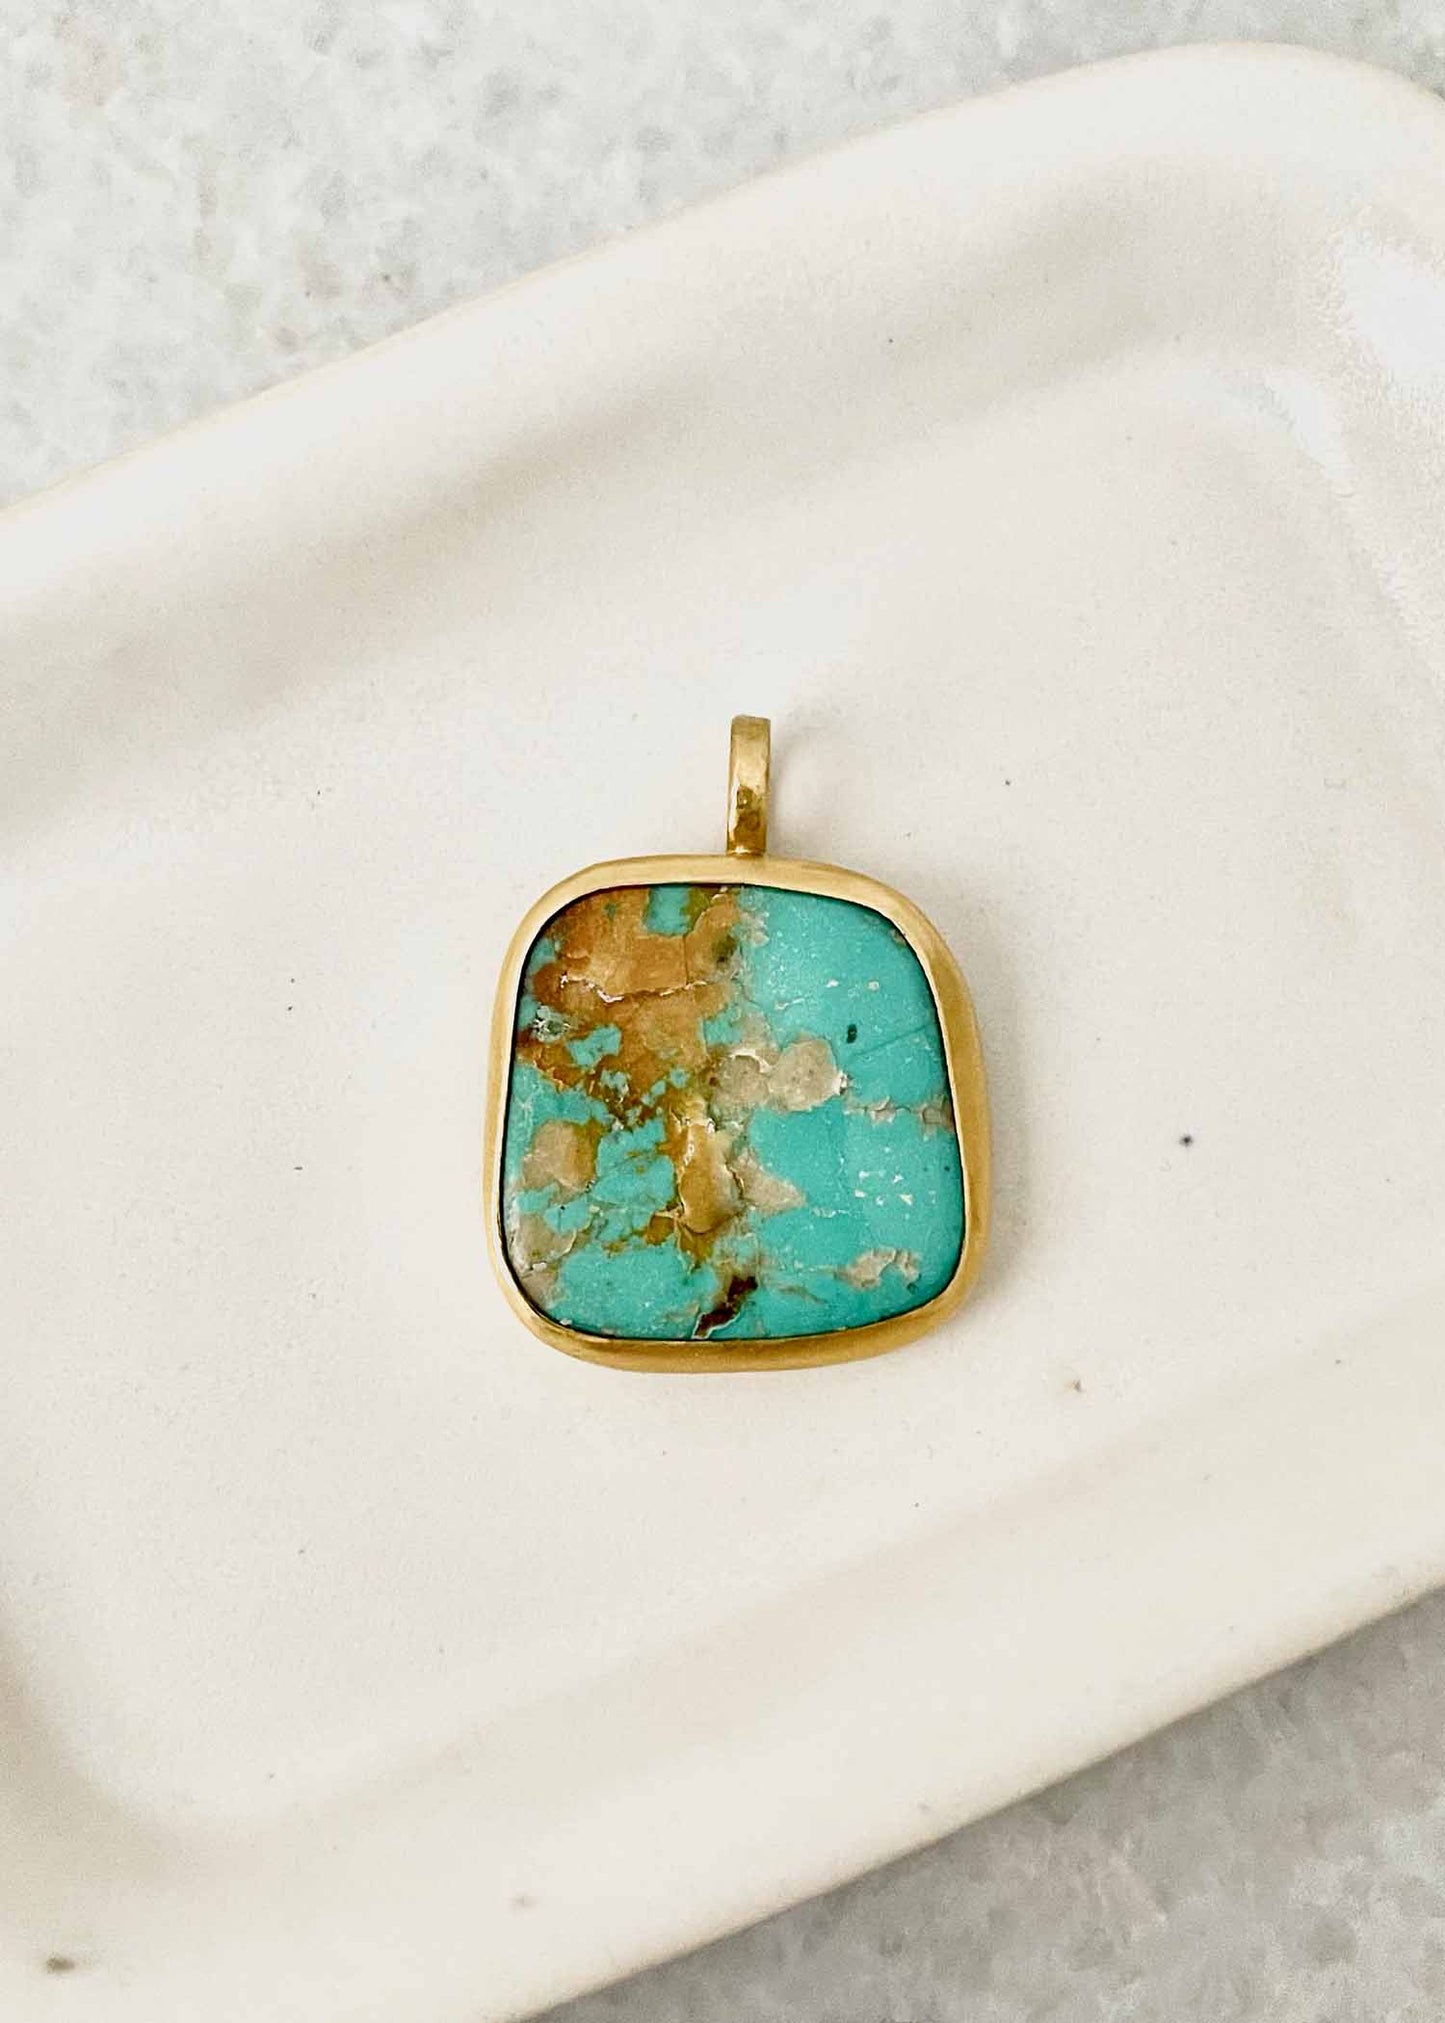 heike-large-square-turquoise-hachita-mine-new-mexico-set-in-22k-gold-back-in-18k-gold | Jewelry | Heike Grebenstein